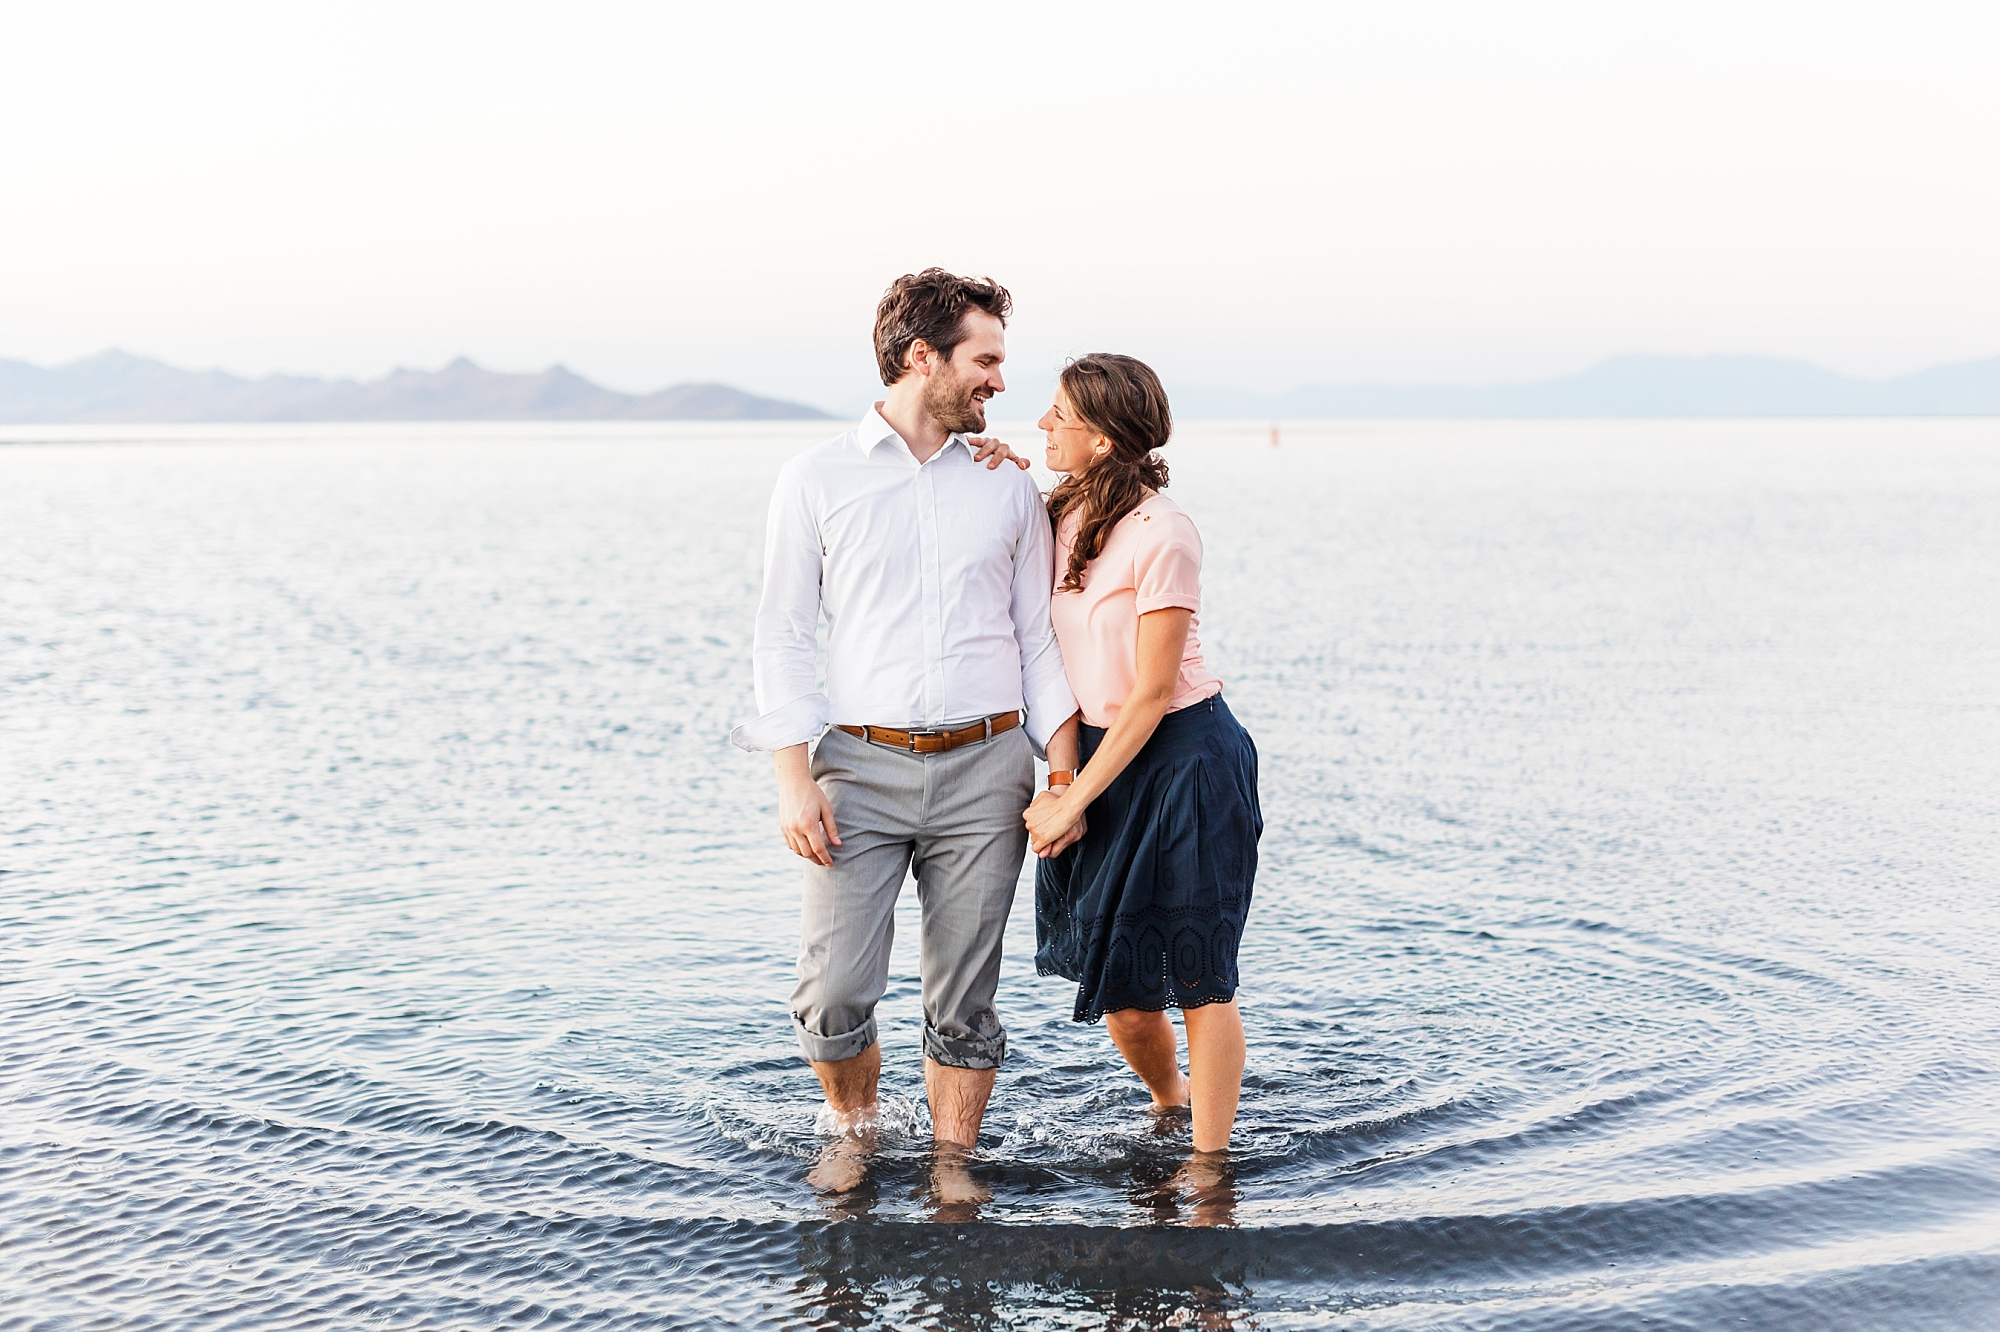 Engagement session at the beach